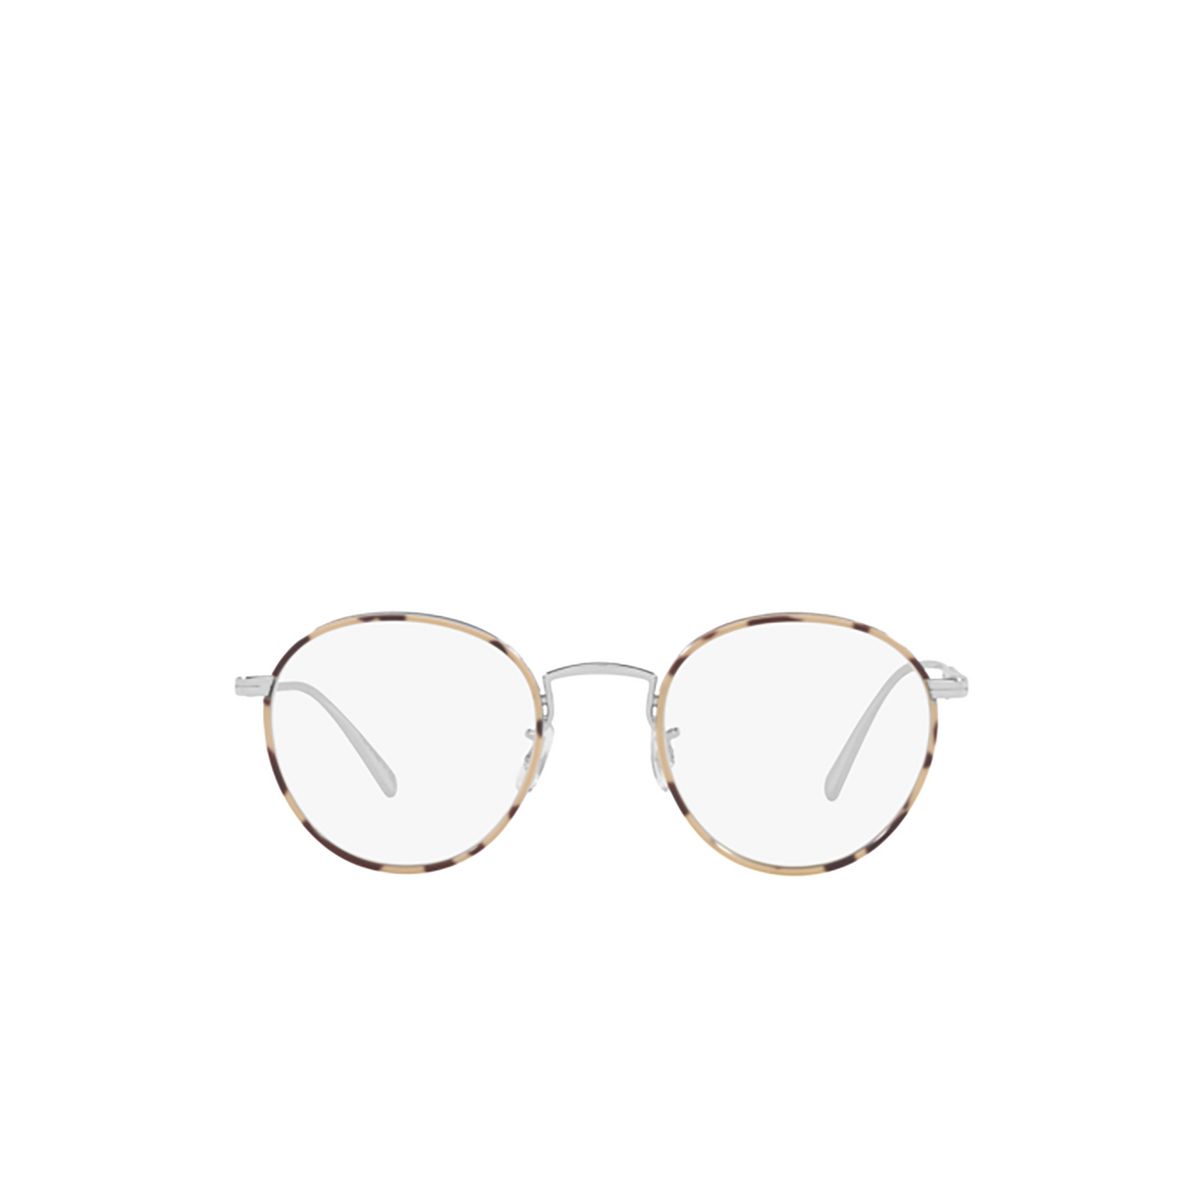 Oliver Peoples ARTEMIO R Eyeglasses 5036 Silver / Taupe Tortoise - front view